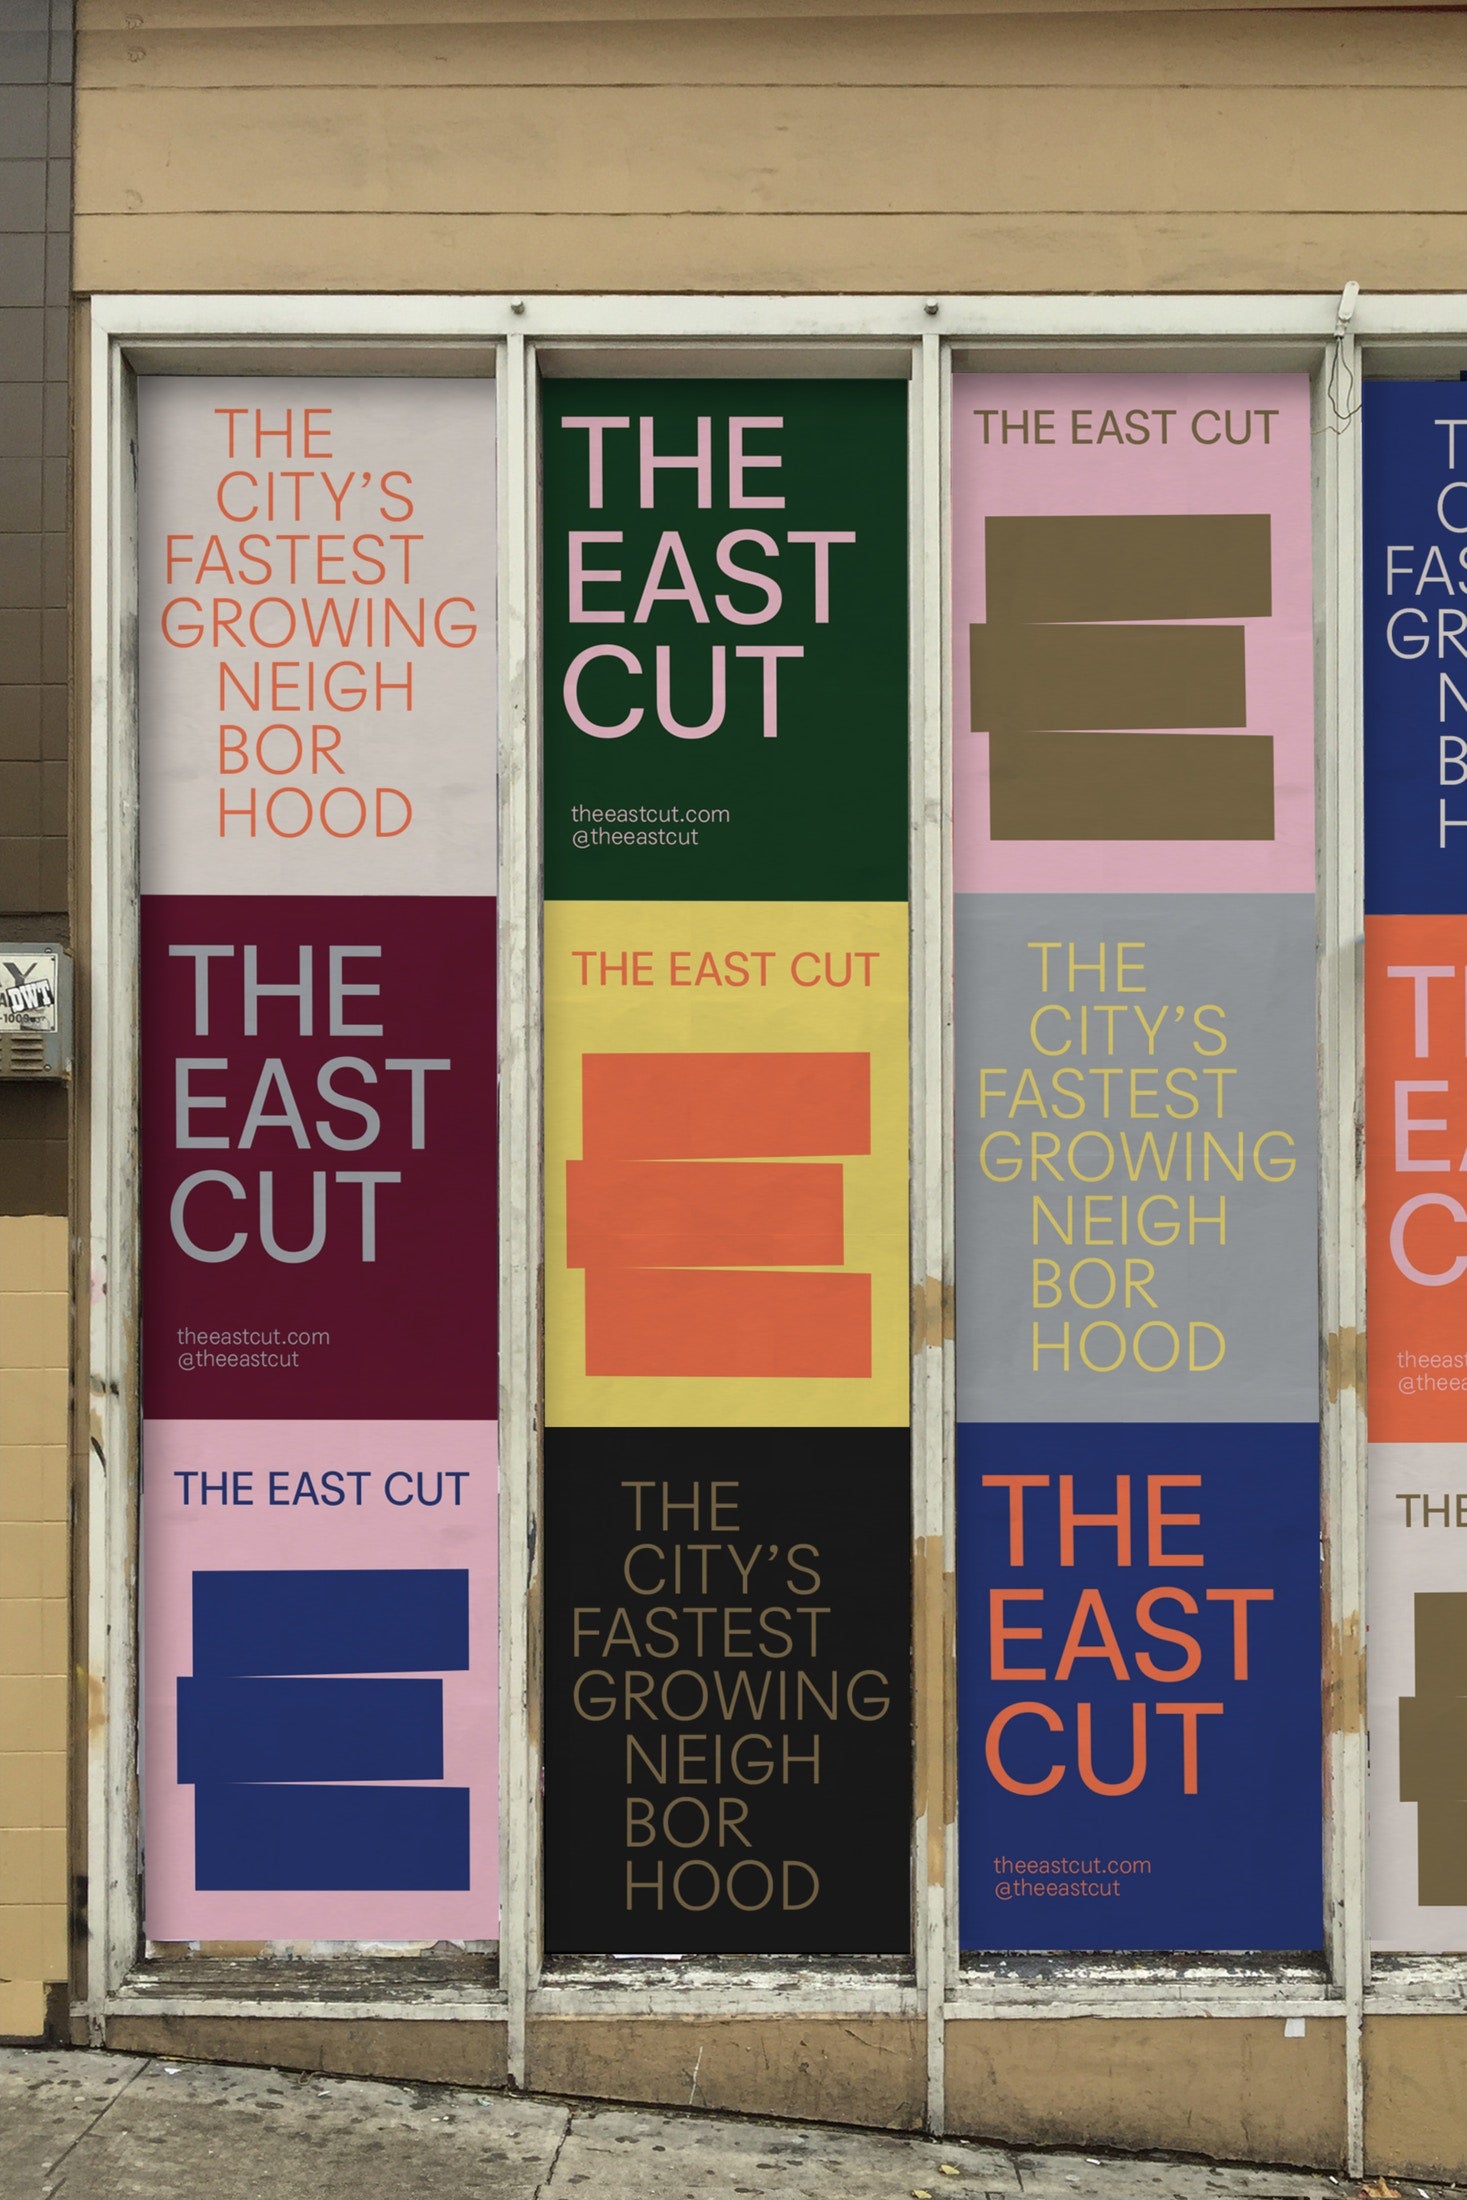 The East Cut brand identity and graphic poster design style